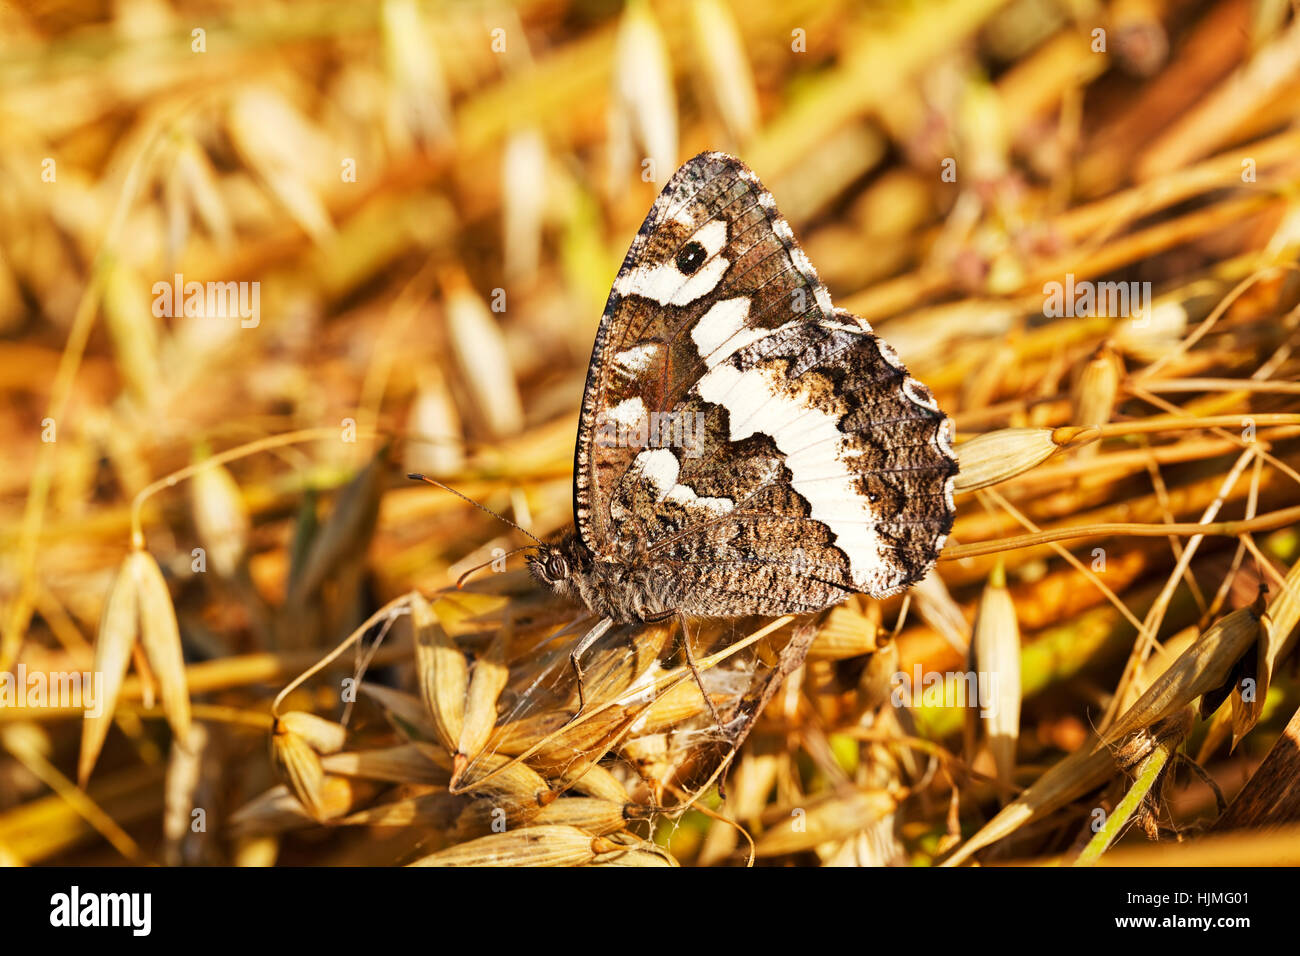 butterfly Brintesia circe on the dry grass in nature, note shallow depth of field Stock Photo